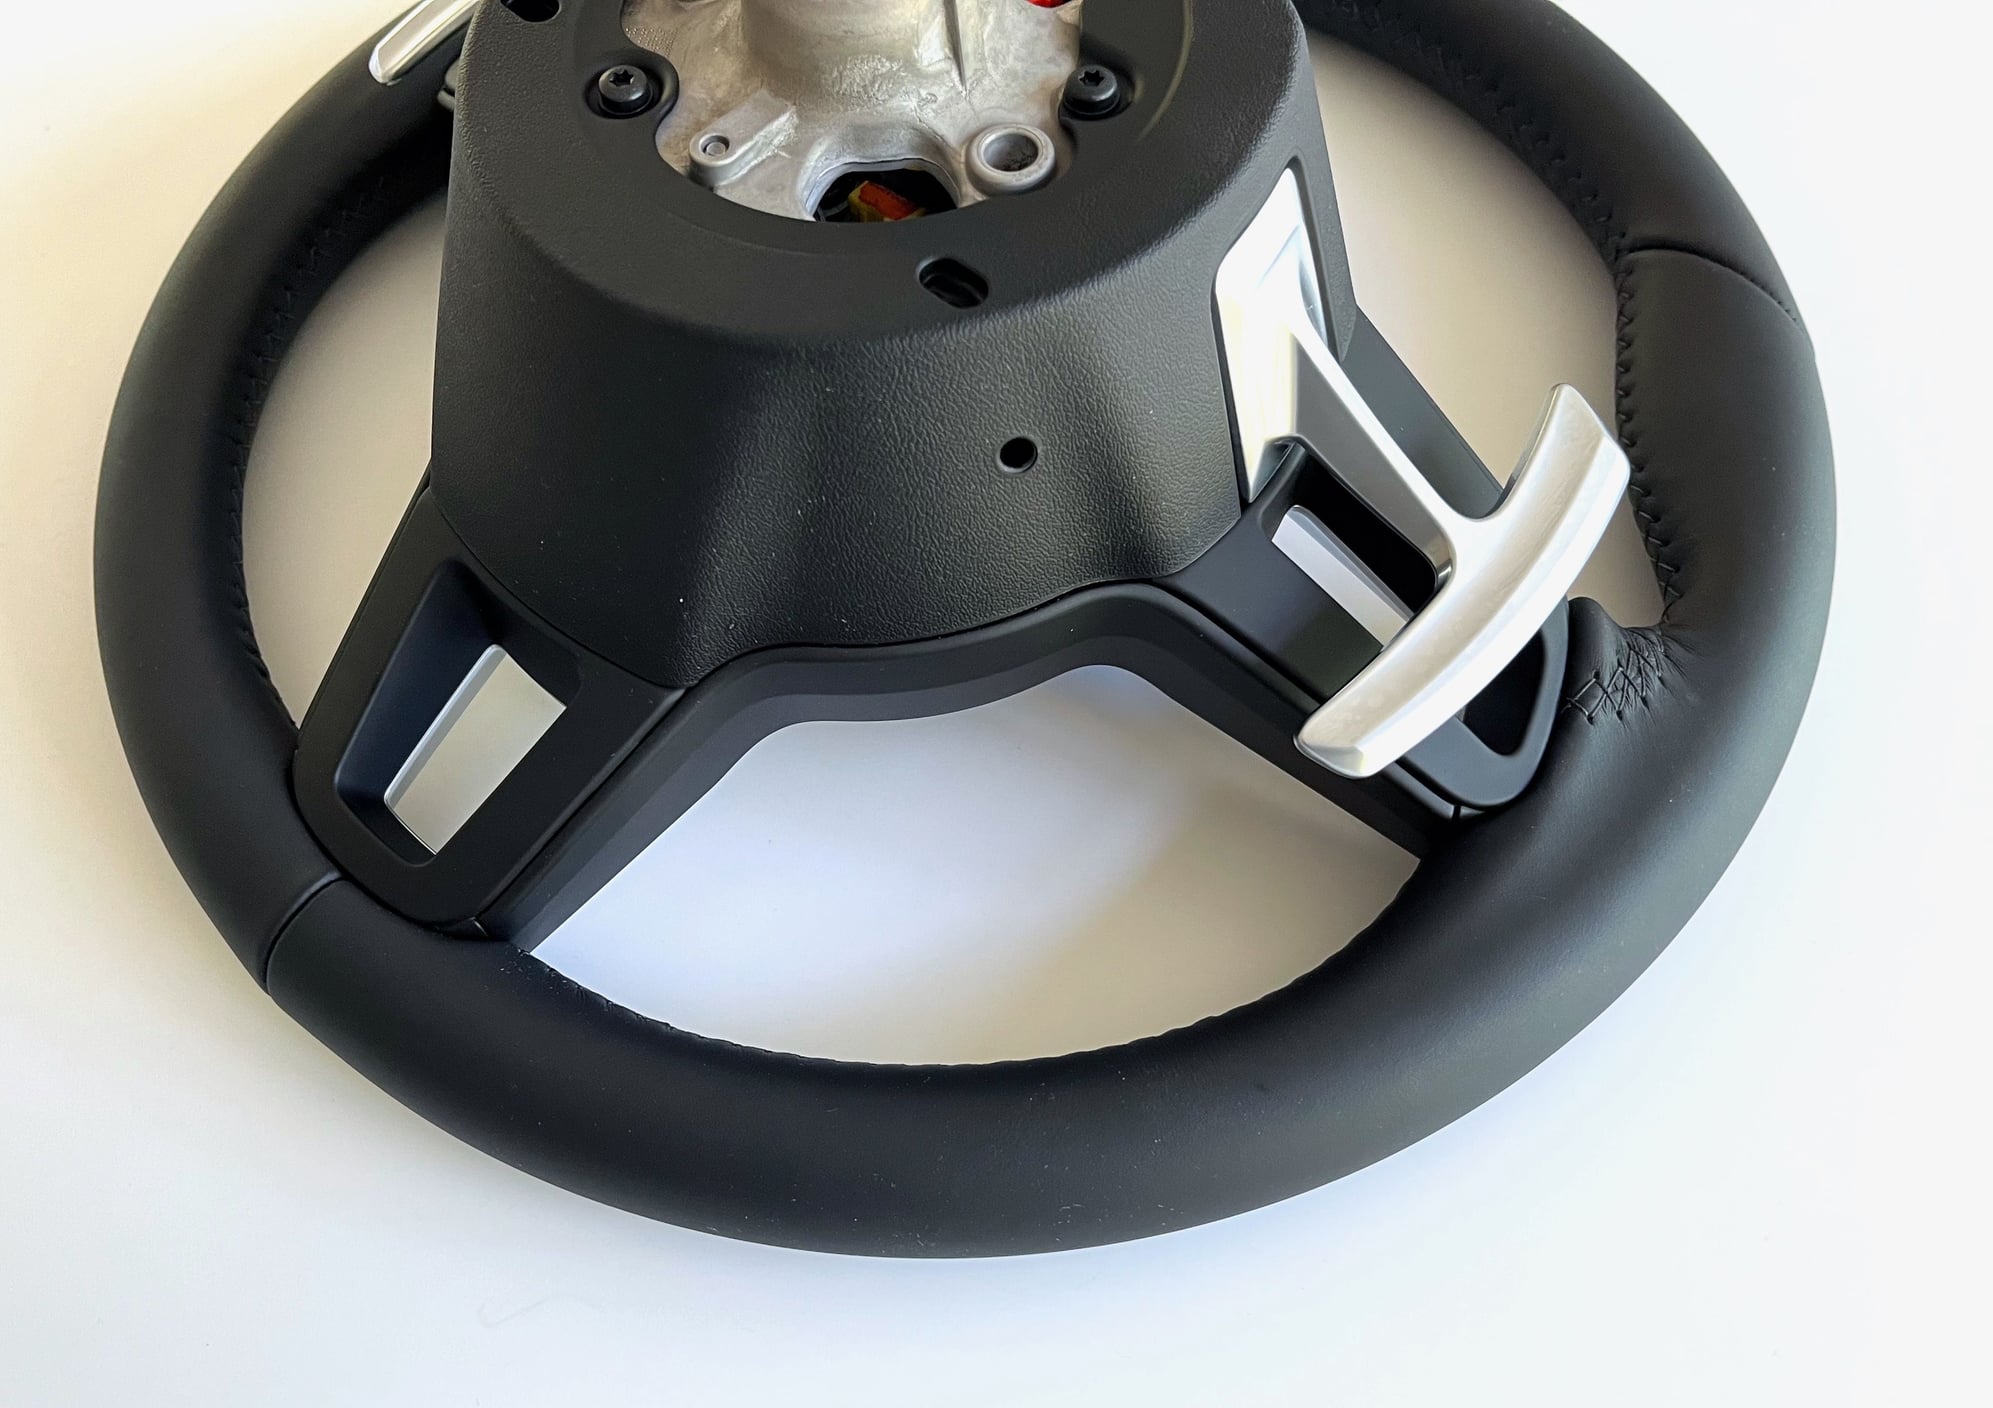 Interior/Upholstery - Porsche 991.2 GT Sport PDK Steering Wheel & Airbag 9P1419091MKA34 - Used - 2009 to 2019 Porsche 911 - Vancouver, BC V6J1T5, Canada